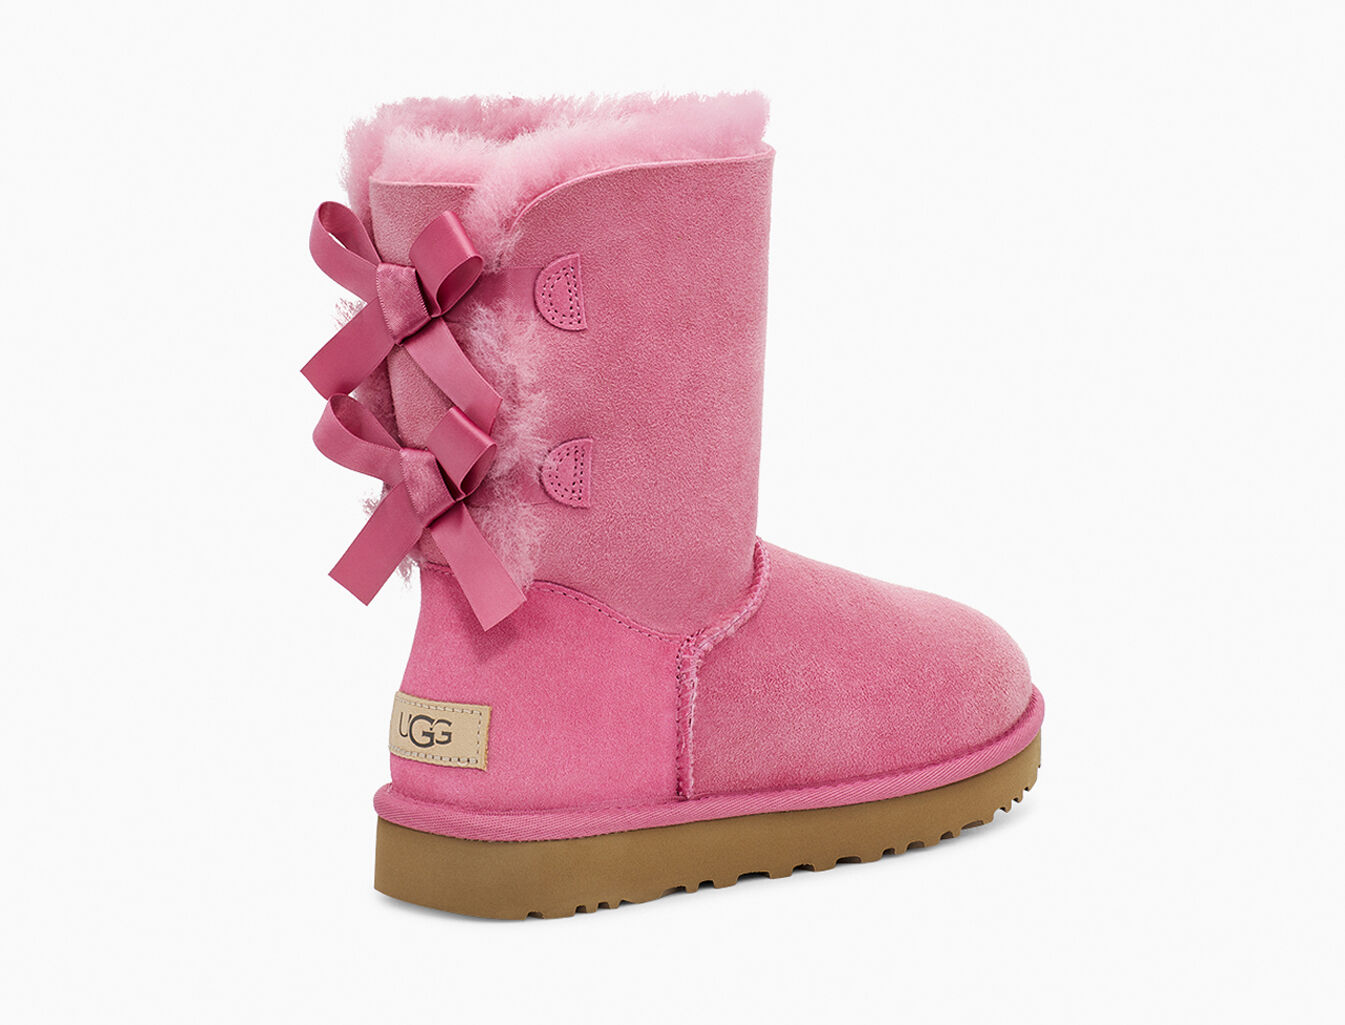 new ugg boots with bows